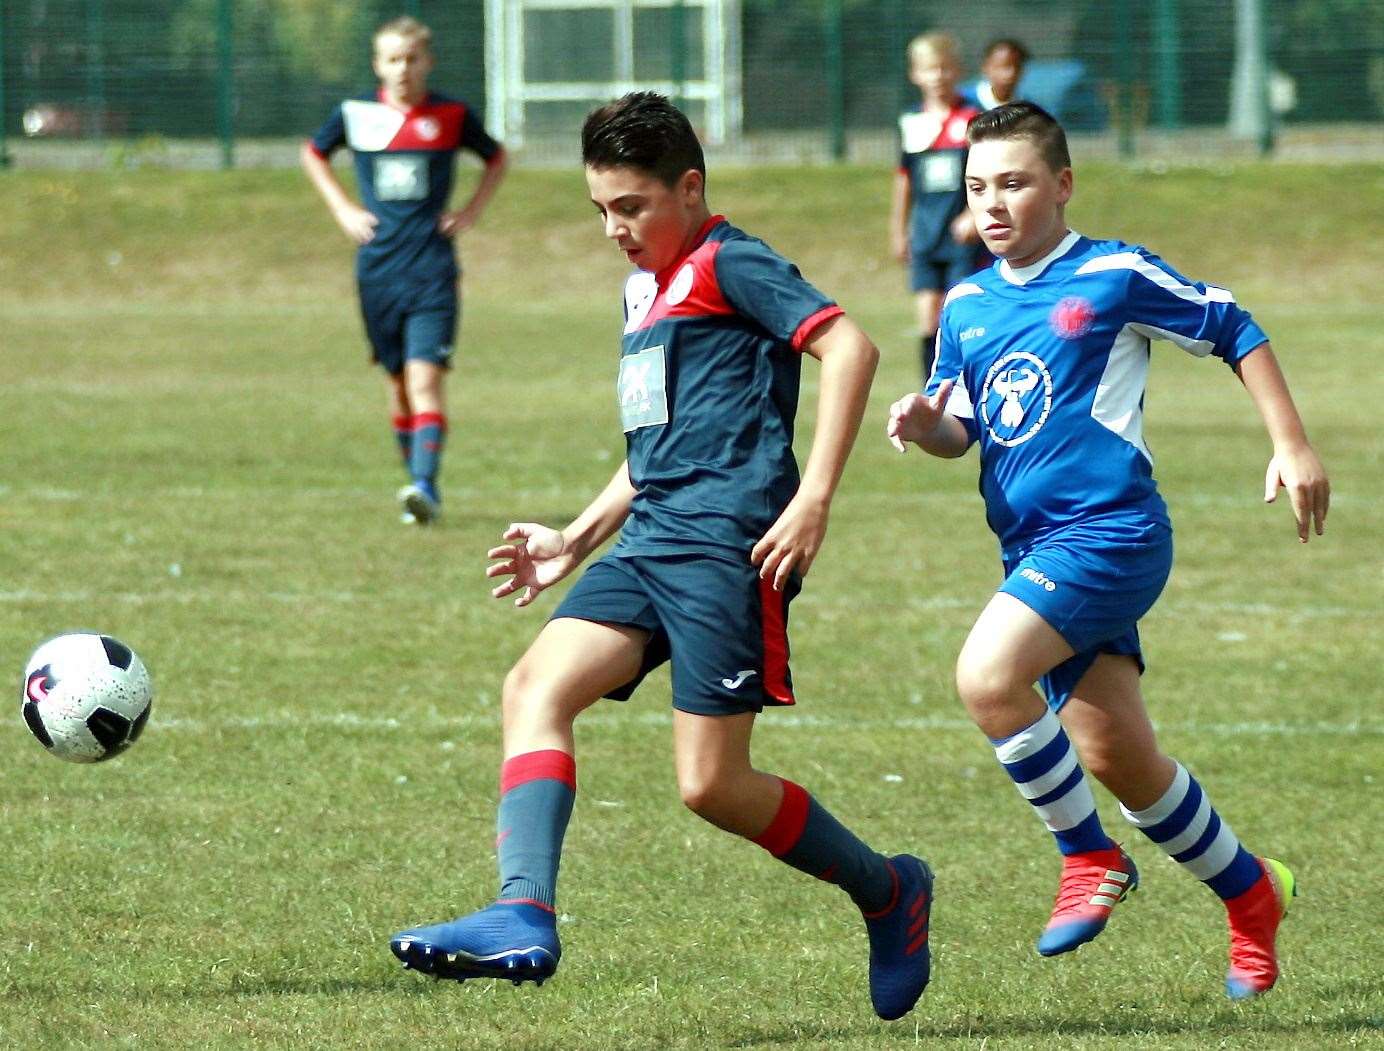 Hempsted Valley Rangers (blue/red) battle Northfleet Eagles White in Under-14 Division 1 Picture: Phil Lee